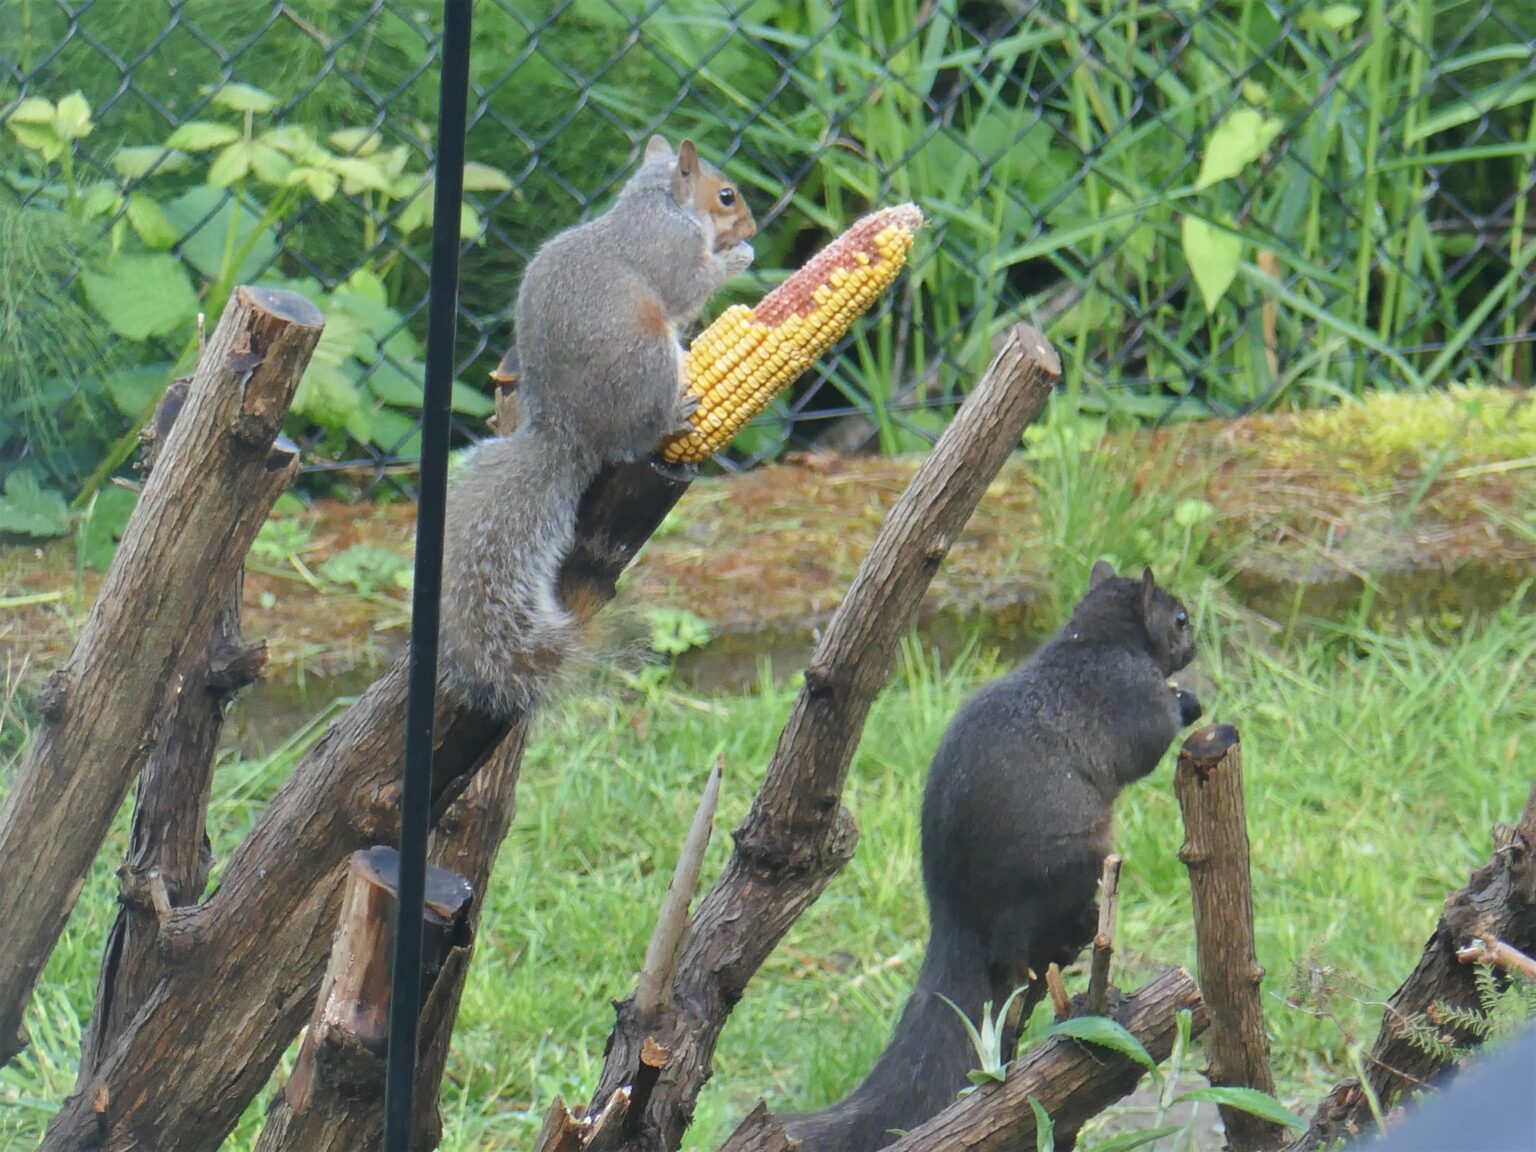 A gray squirrel and black squirrel lunch together in the Alabama Hill neighborhood of Bellingham.